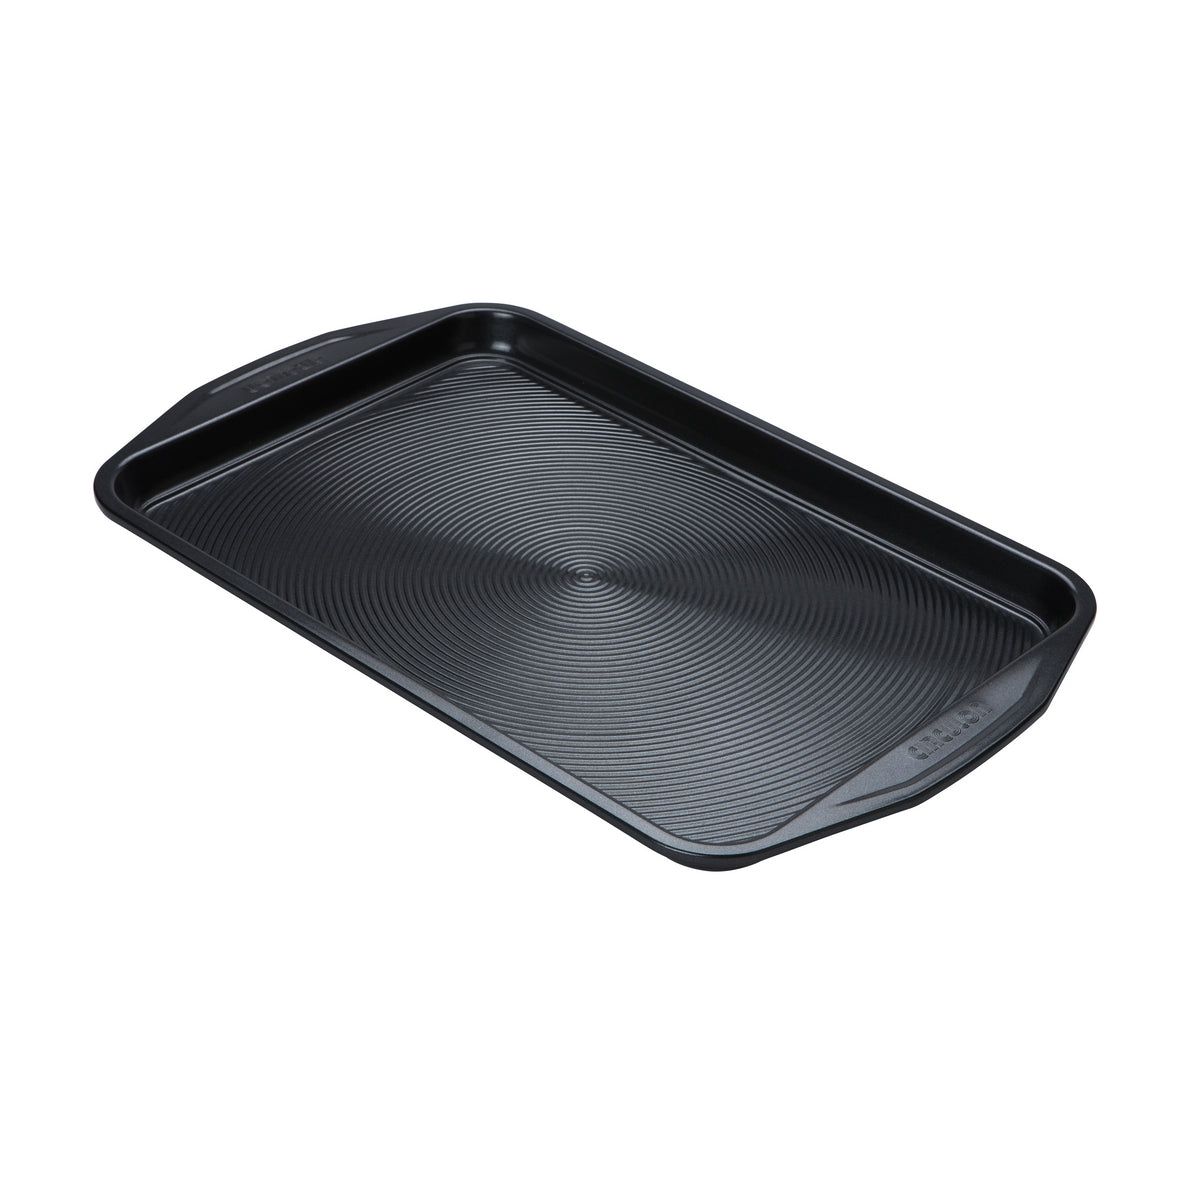 Ultimum non-stick 5 piece bakeware set from Circulon comes with a lifetime guarantee